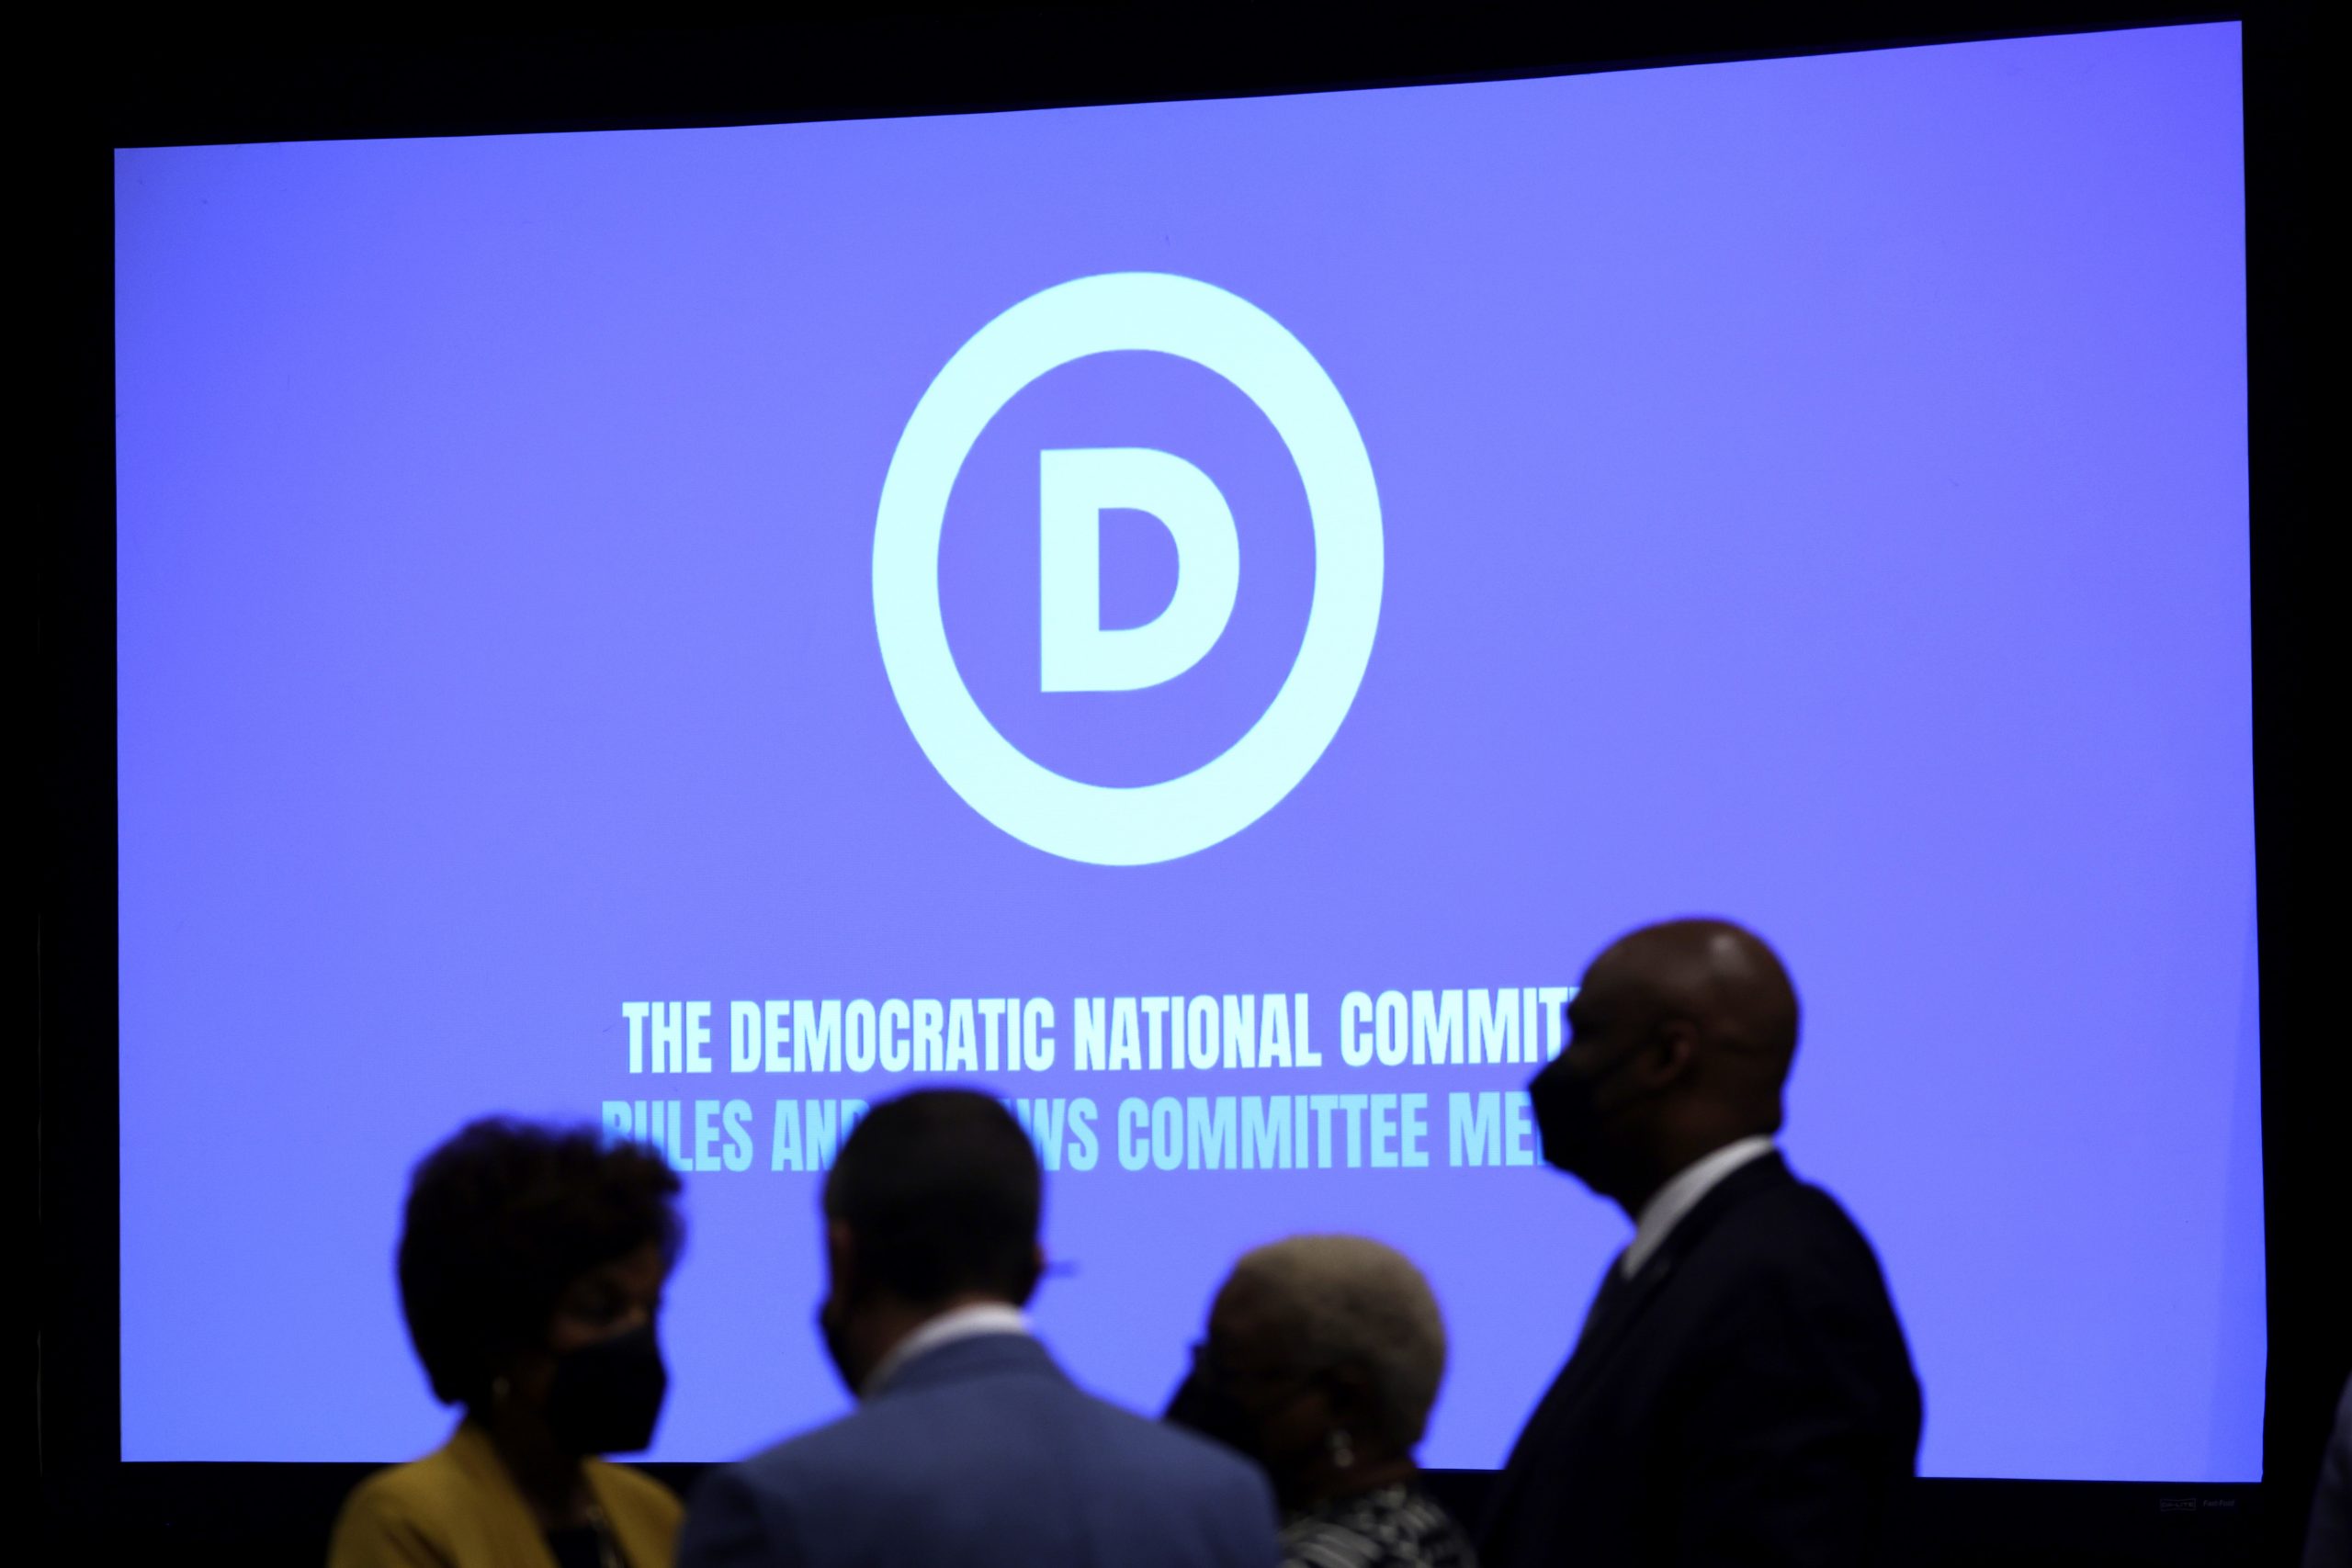 DNC and joint fundraising arm brought in $16.1M in May